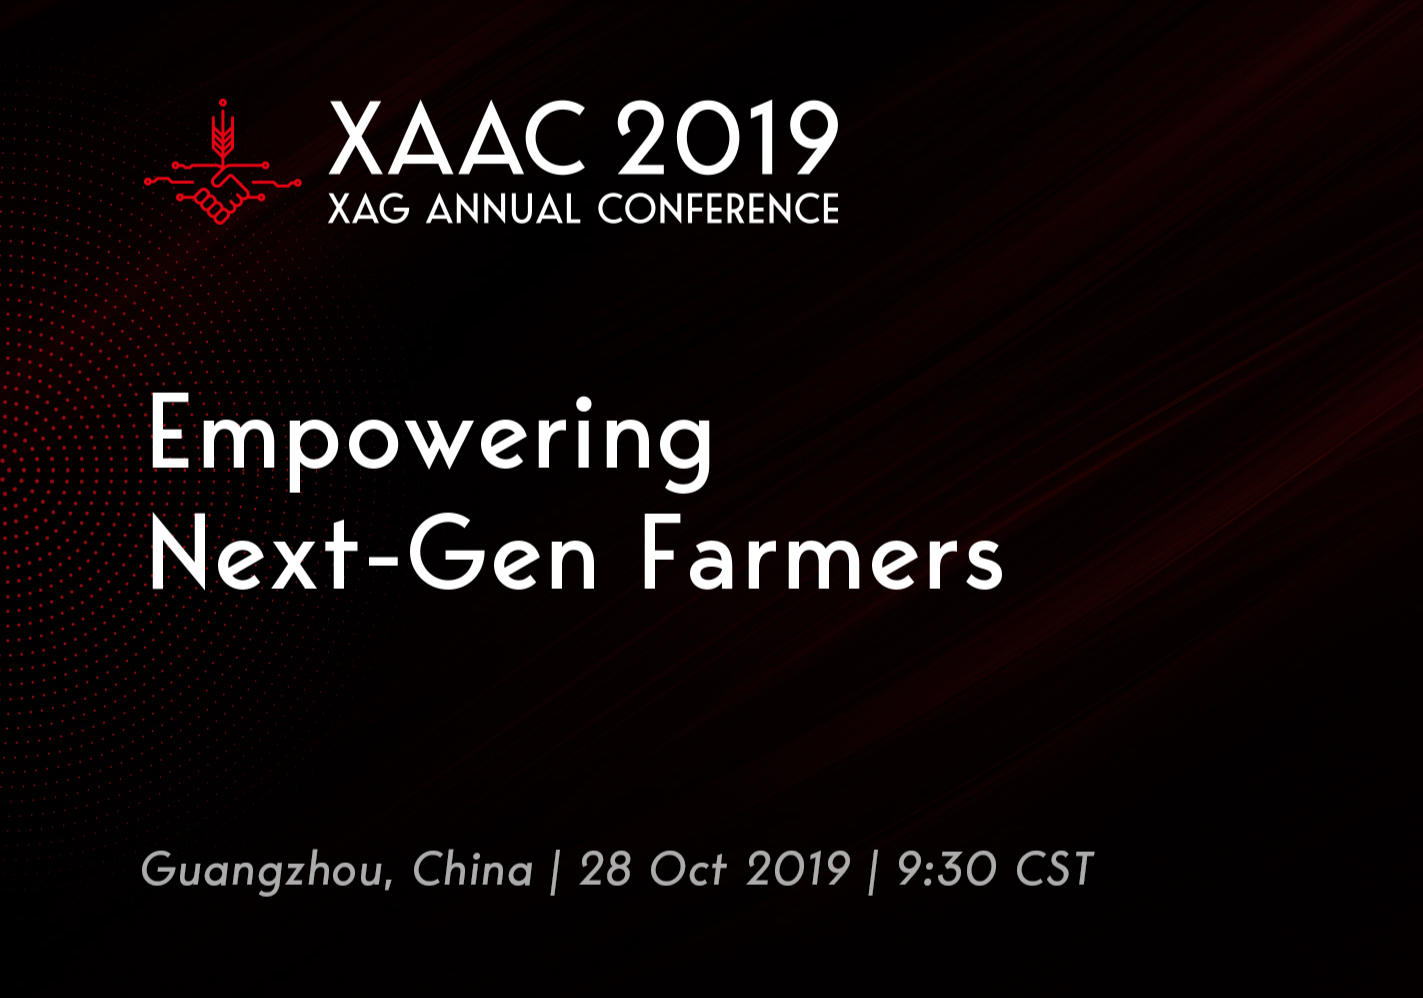 XAG Annual Conference XAAC 2019 Announced For 28 October, Empowering Next-Gen Farmers